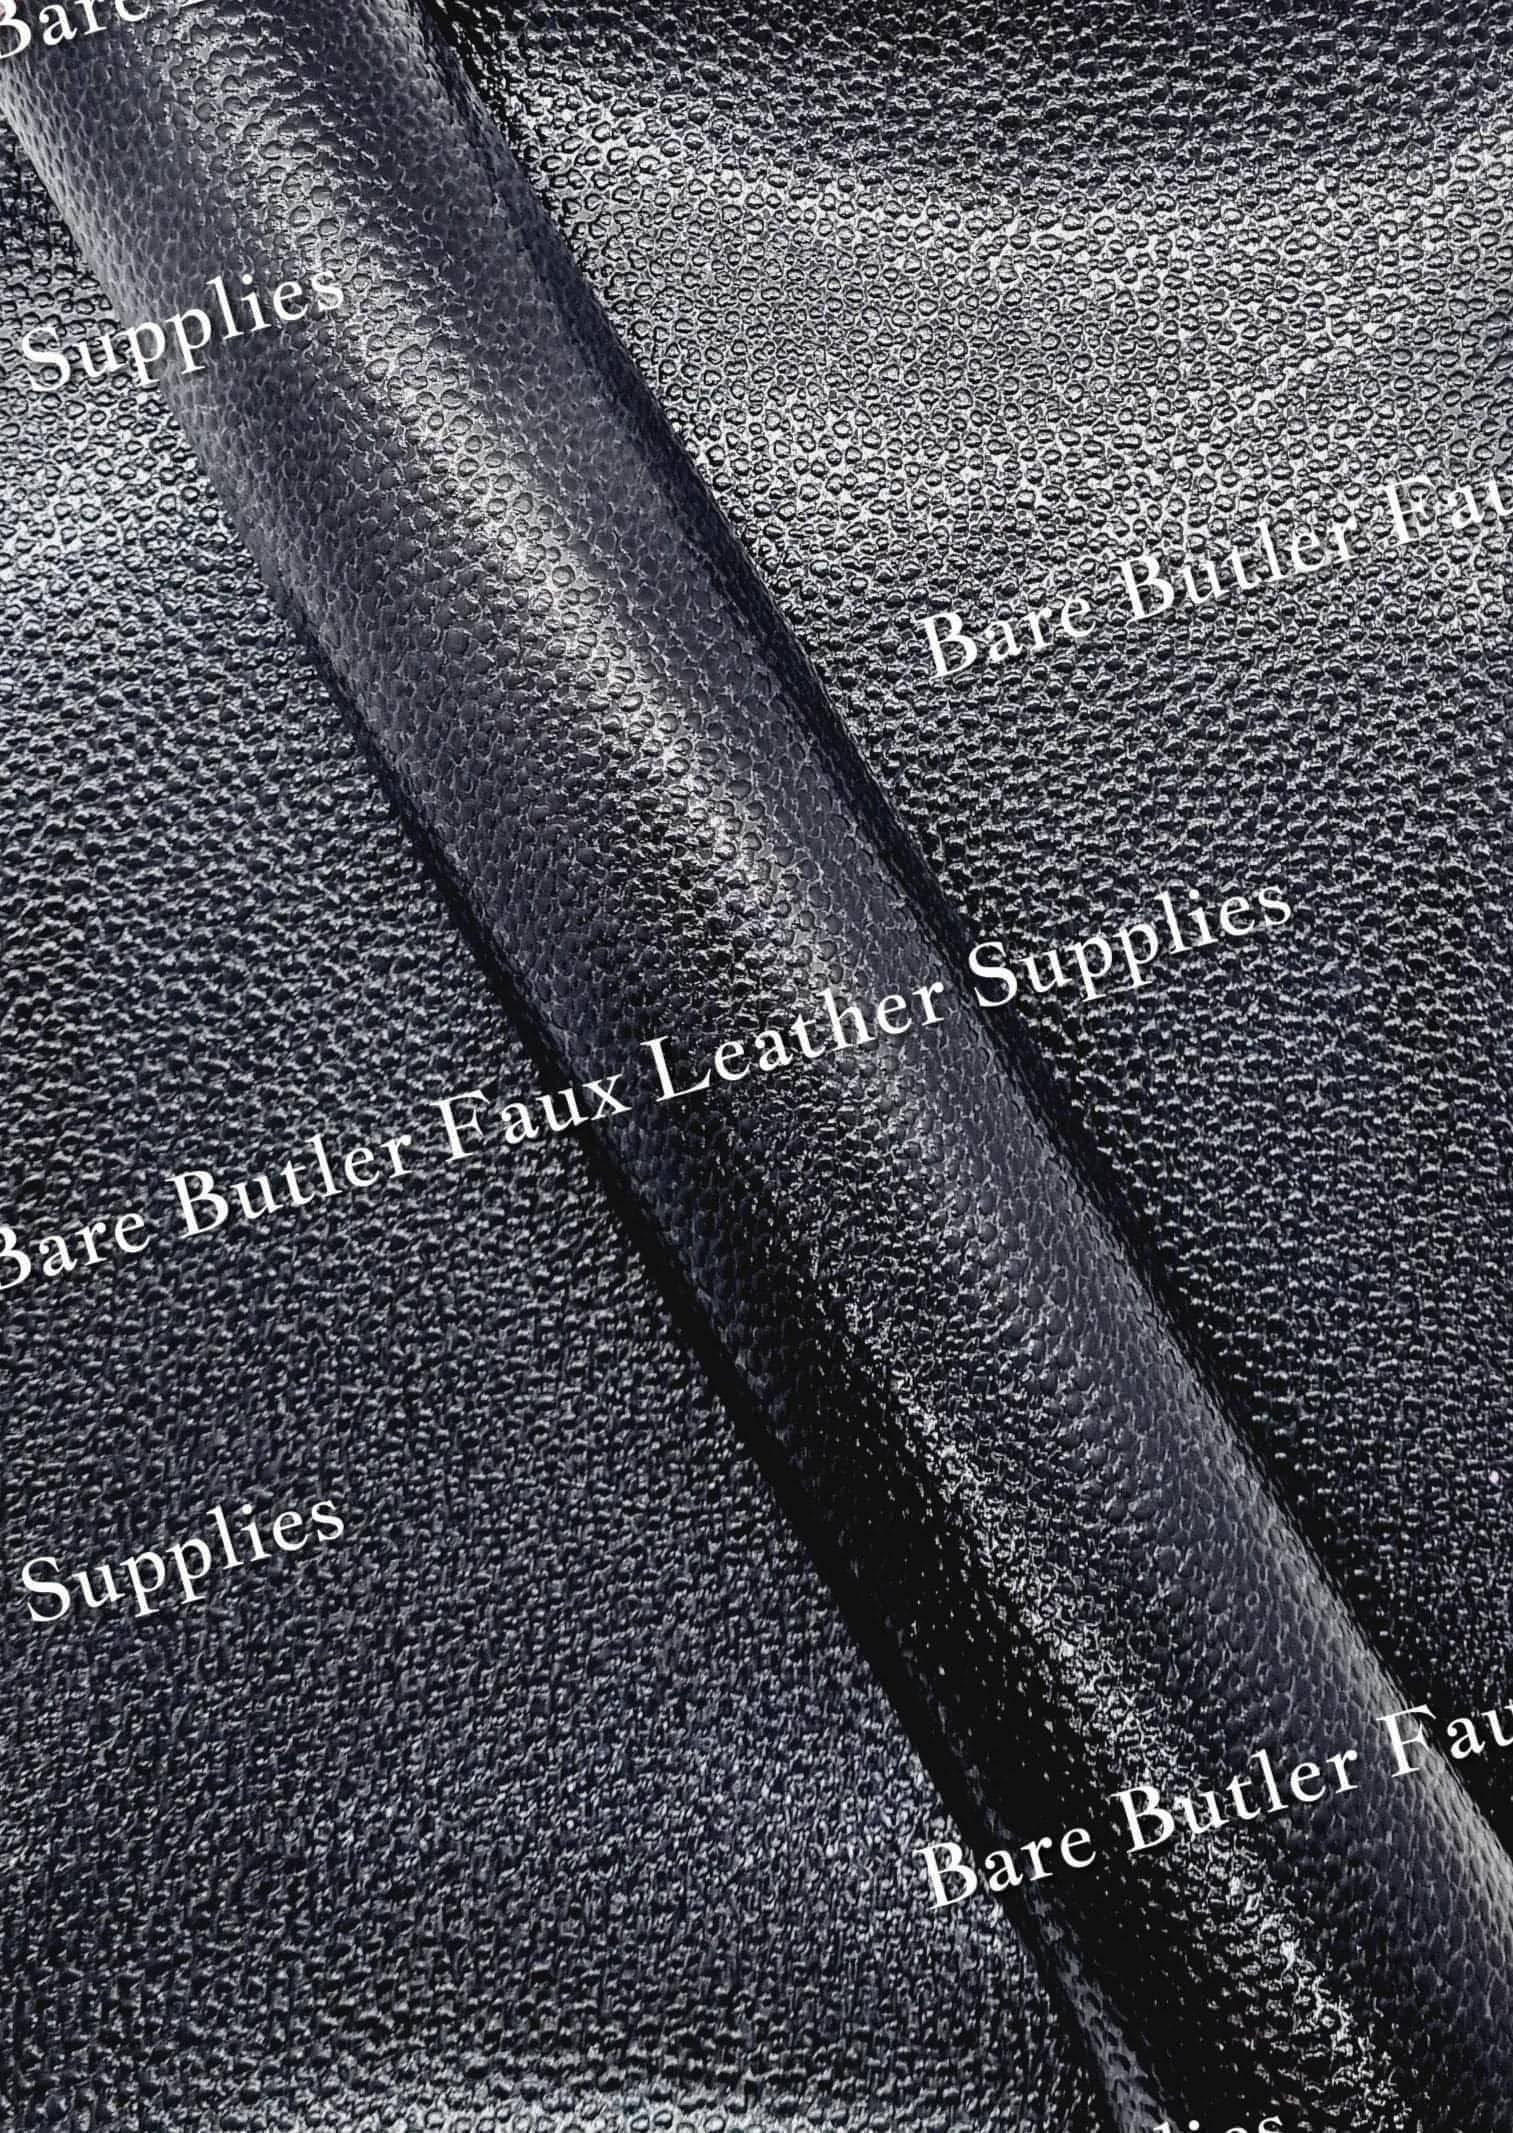 Metallic Black - Faux, Faux Leather, Leather, leatherette, metalic, metallic, metallic's - Bare Butler Faux Leather Supplies 